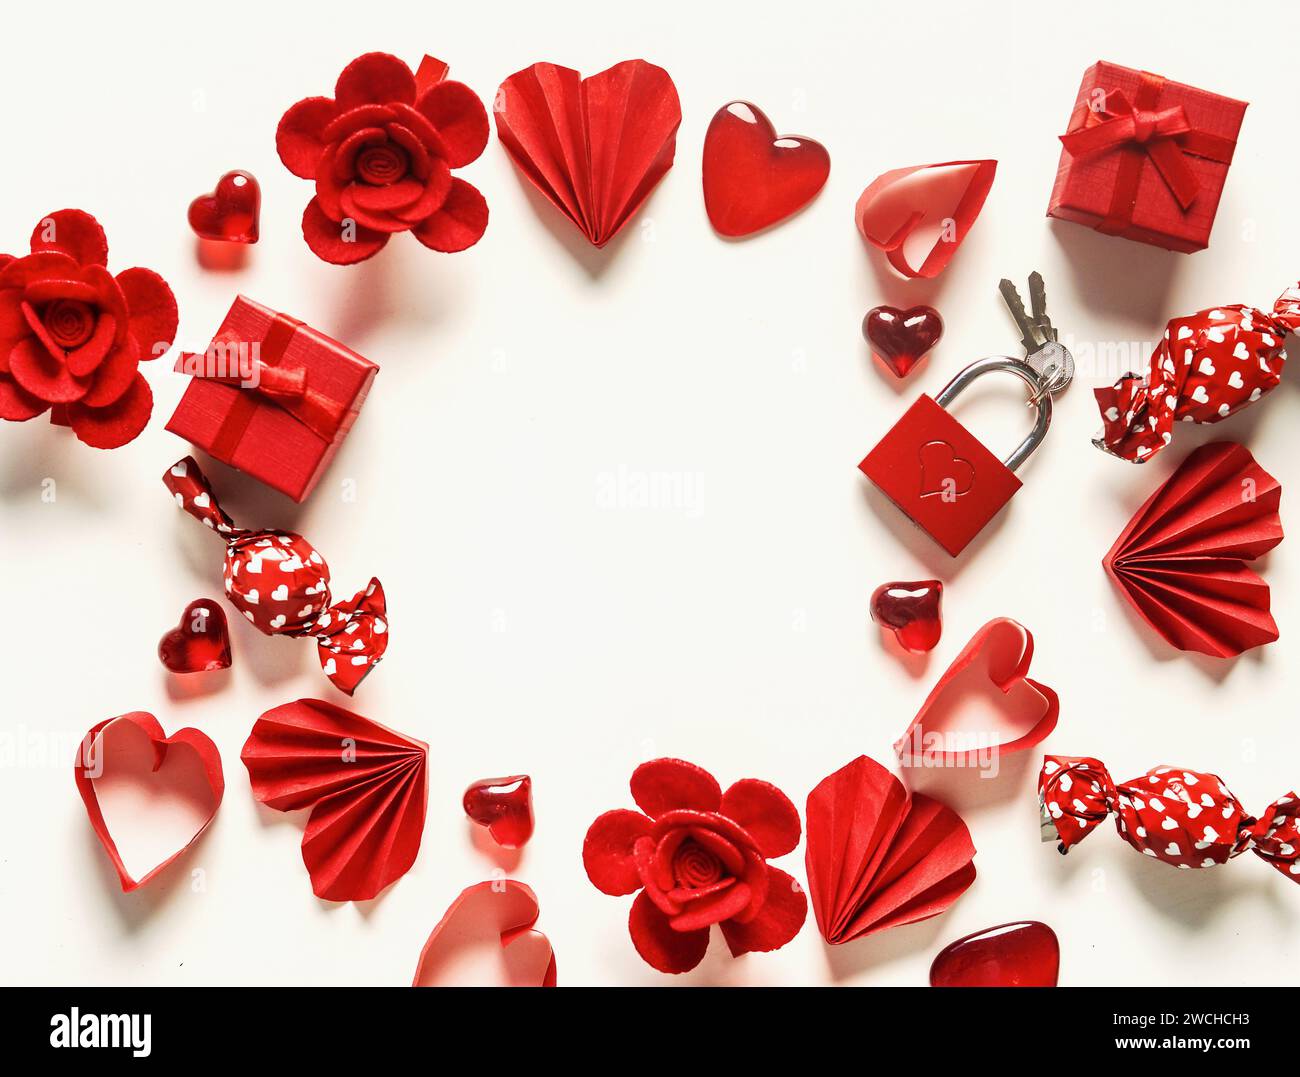 Valentine's day frame made with red hearts, flowers and candies on white background, top view Stock Photo